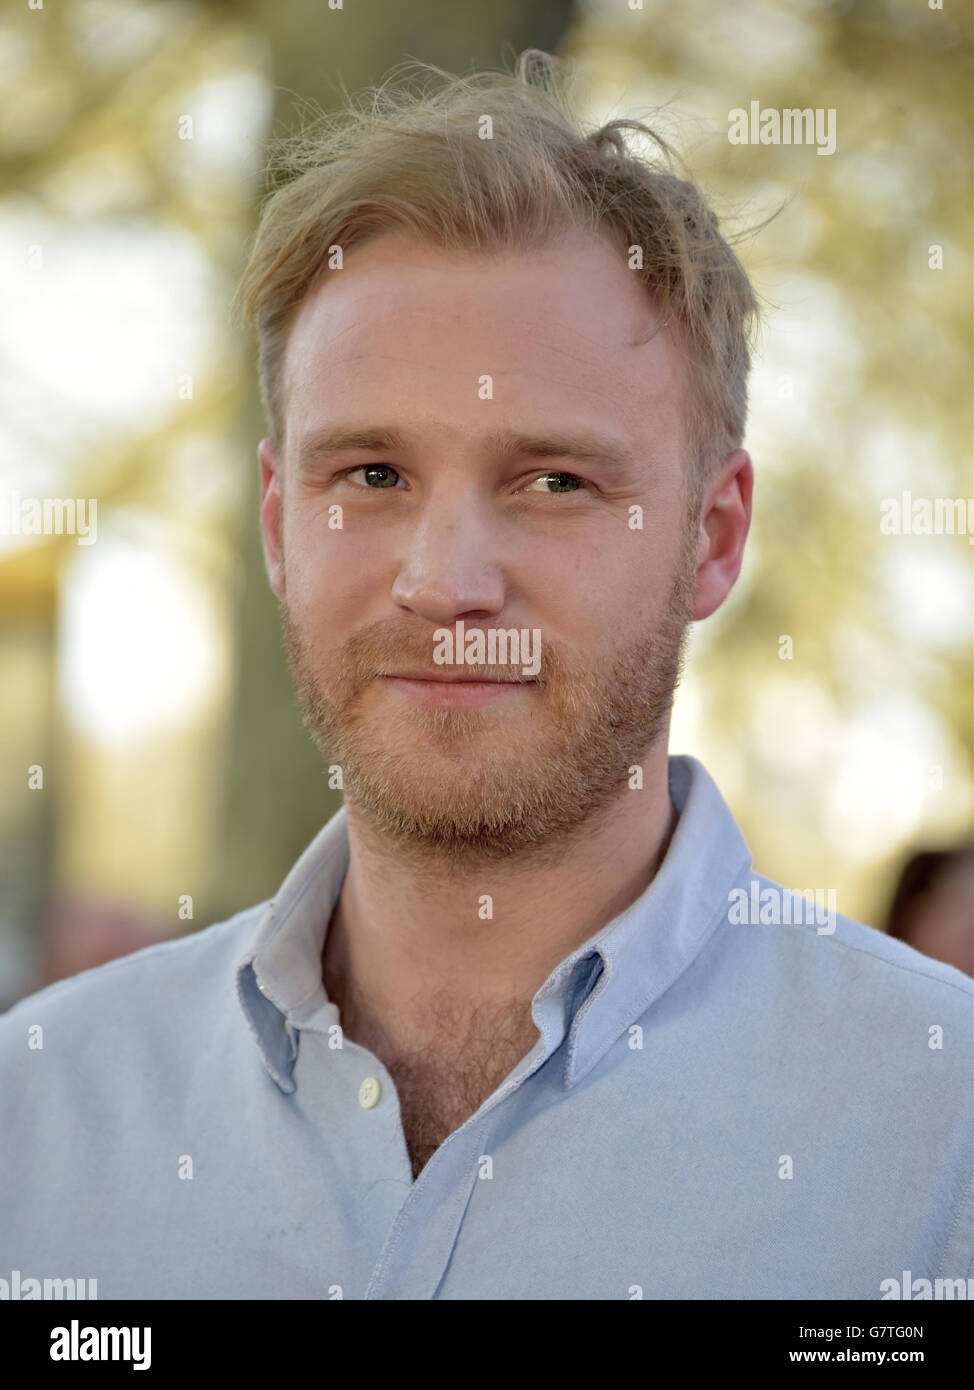 Sam Phillips attending the world premiere of Far From The Madding Crowd held at the BFI Southbank, London. PRESS ASSOCIATION Photo. Picture date: Wednesday April 15, 2015. See PA story SHOWBIZ Madding. Photo credit should read: Matt Crossick/PA Wire Stock Photo